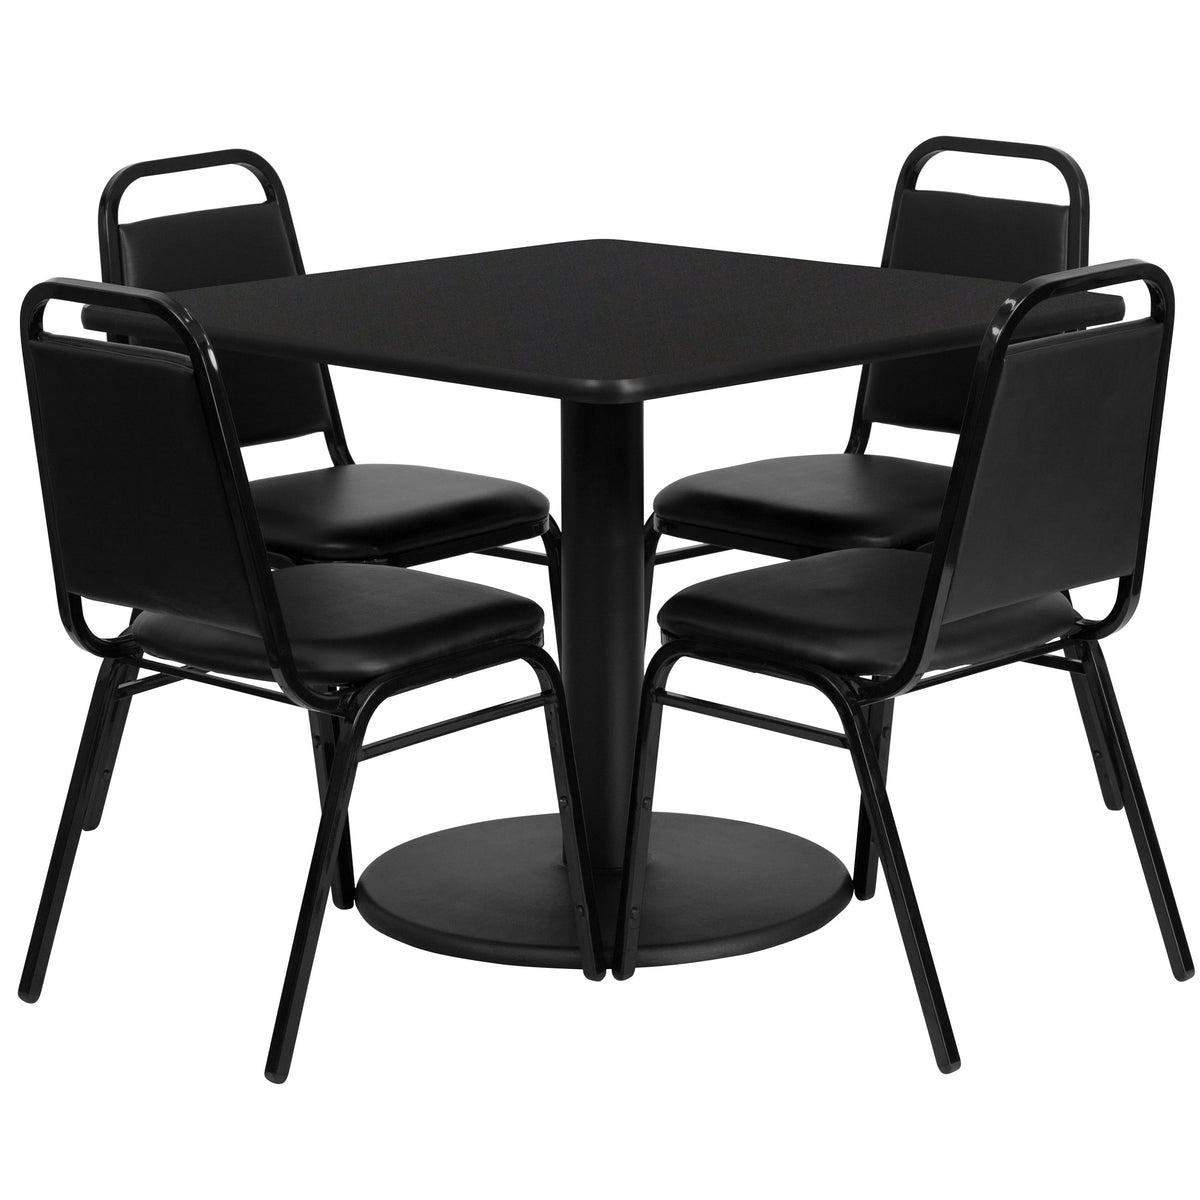 Black Top/Black Vinyl Seat |#| 36inch Square Black Laminate Table with Round Base and 4 Black Banquet Chairs